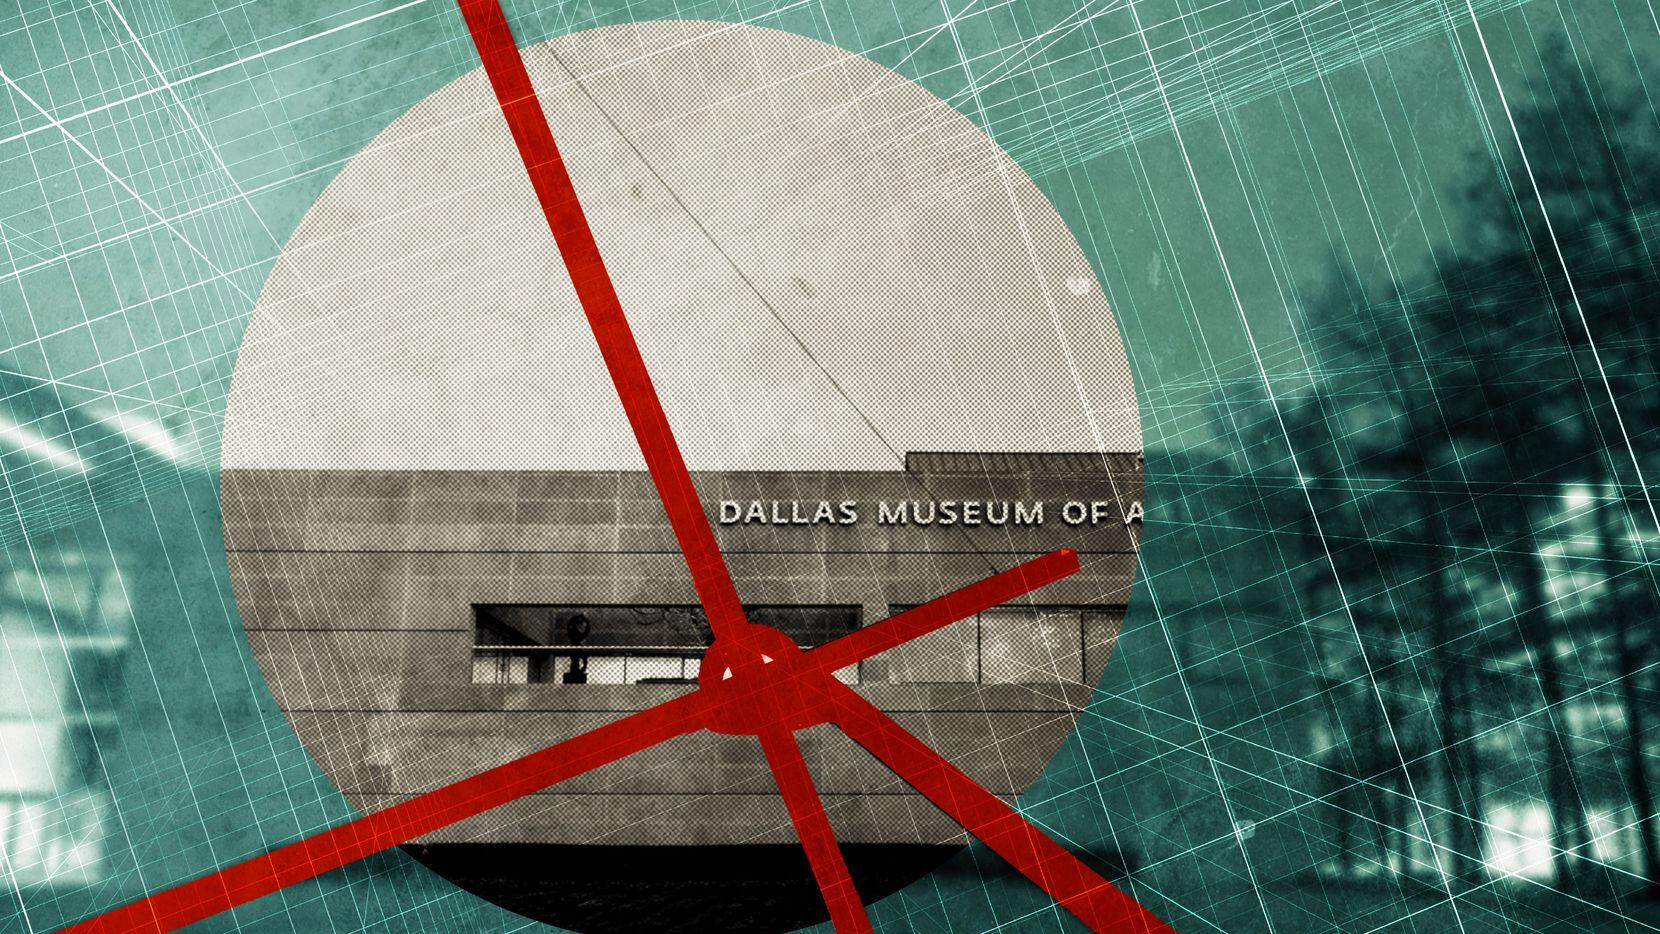 Photo illustration of the Dallas Museum of Art by Jeff Meddaugh.